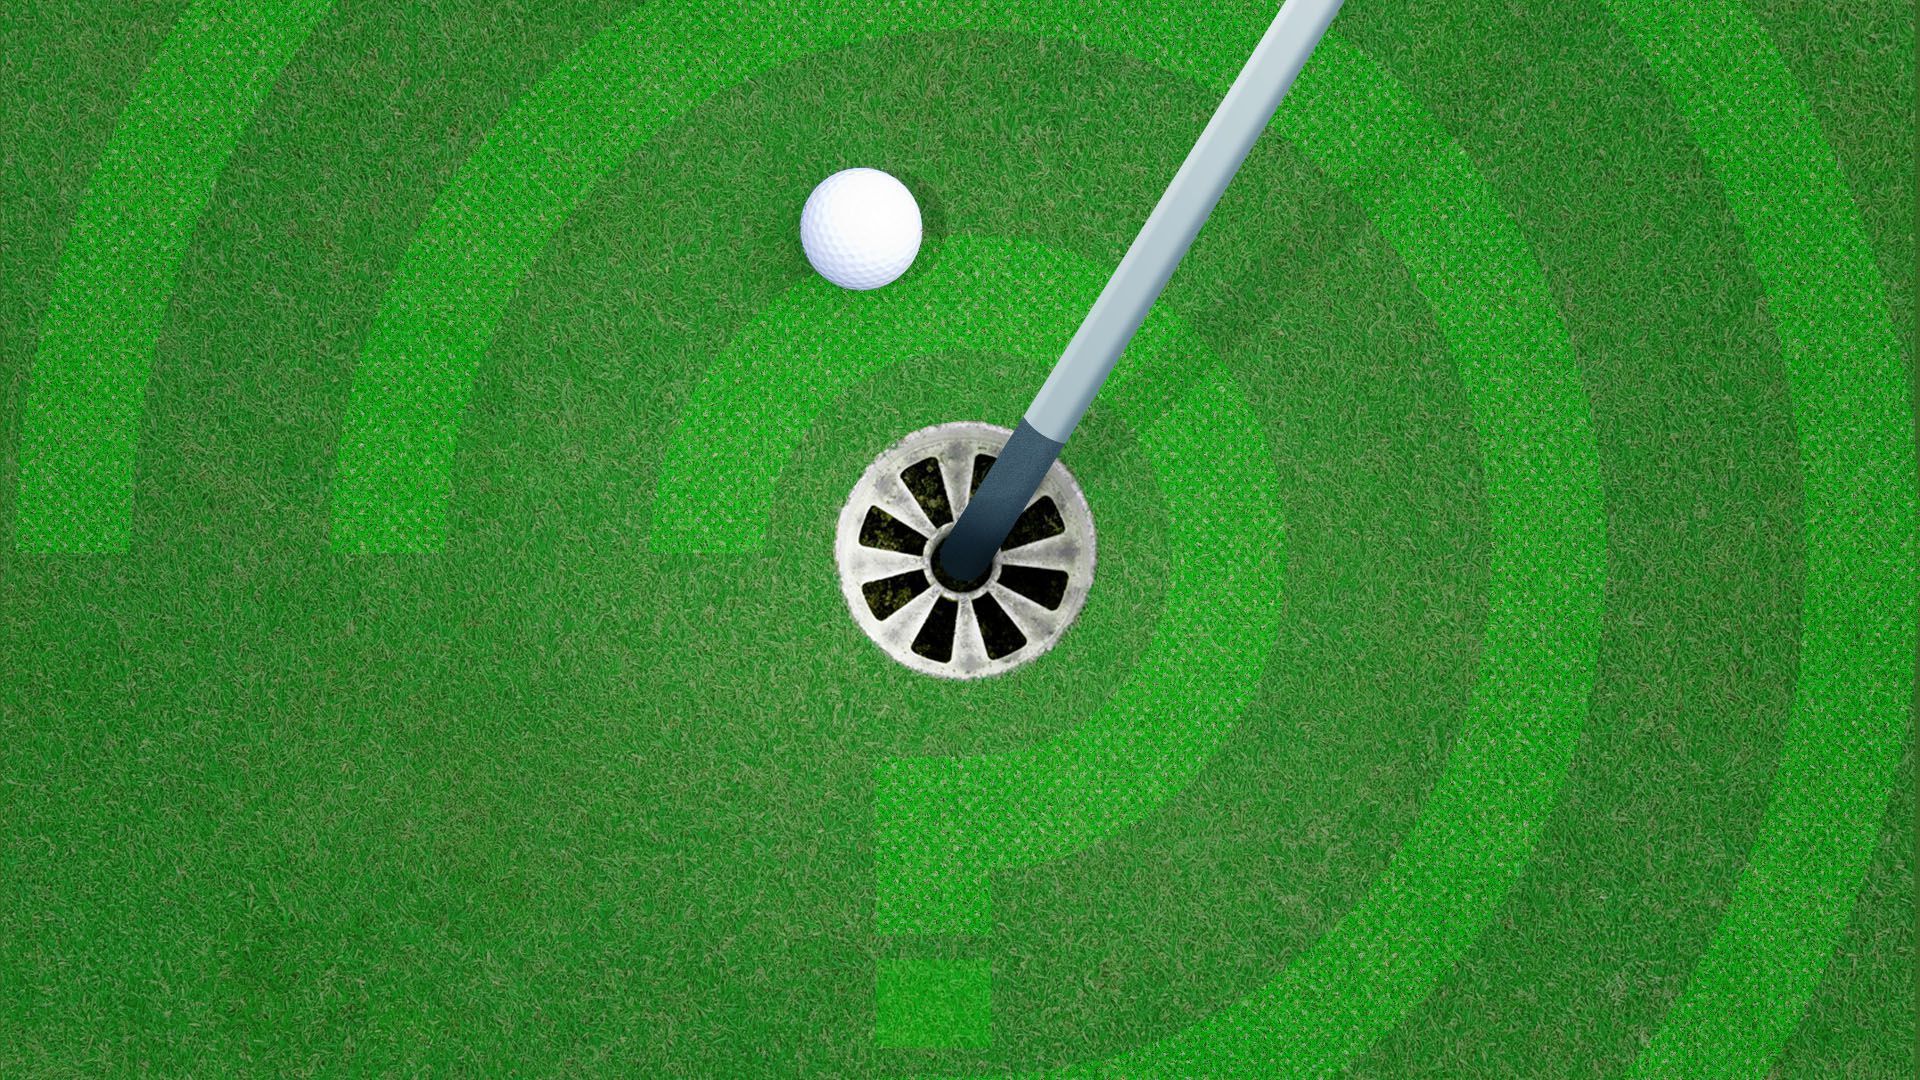 An illustration of a golf hole with a question drawn into the green